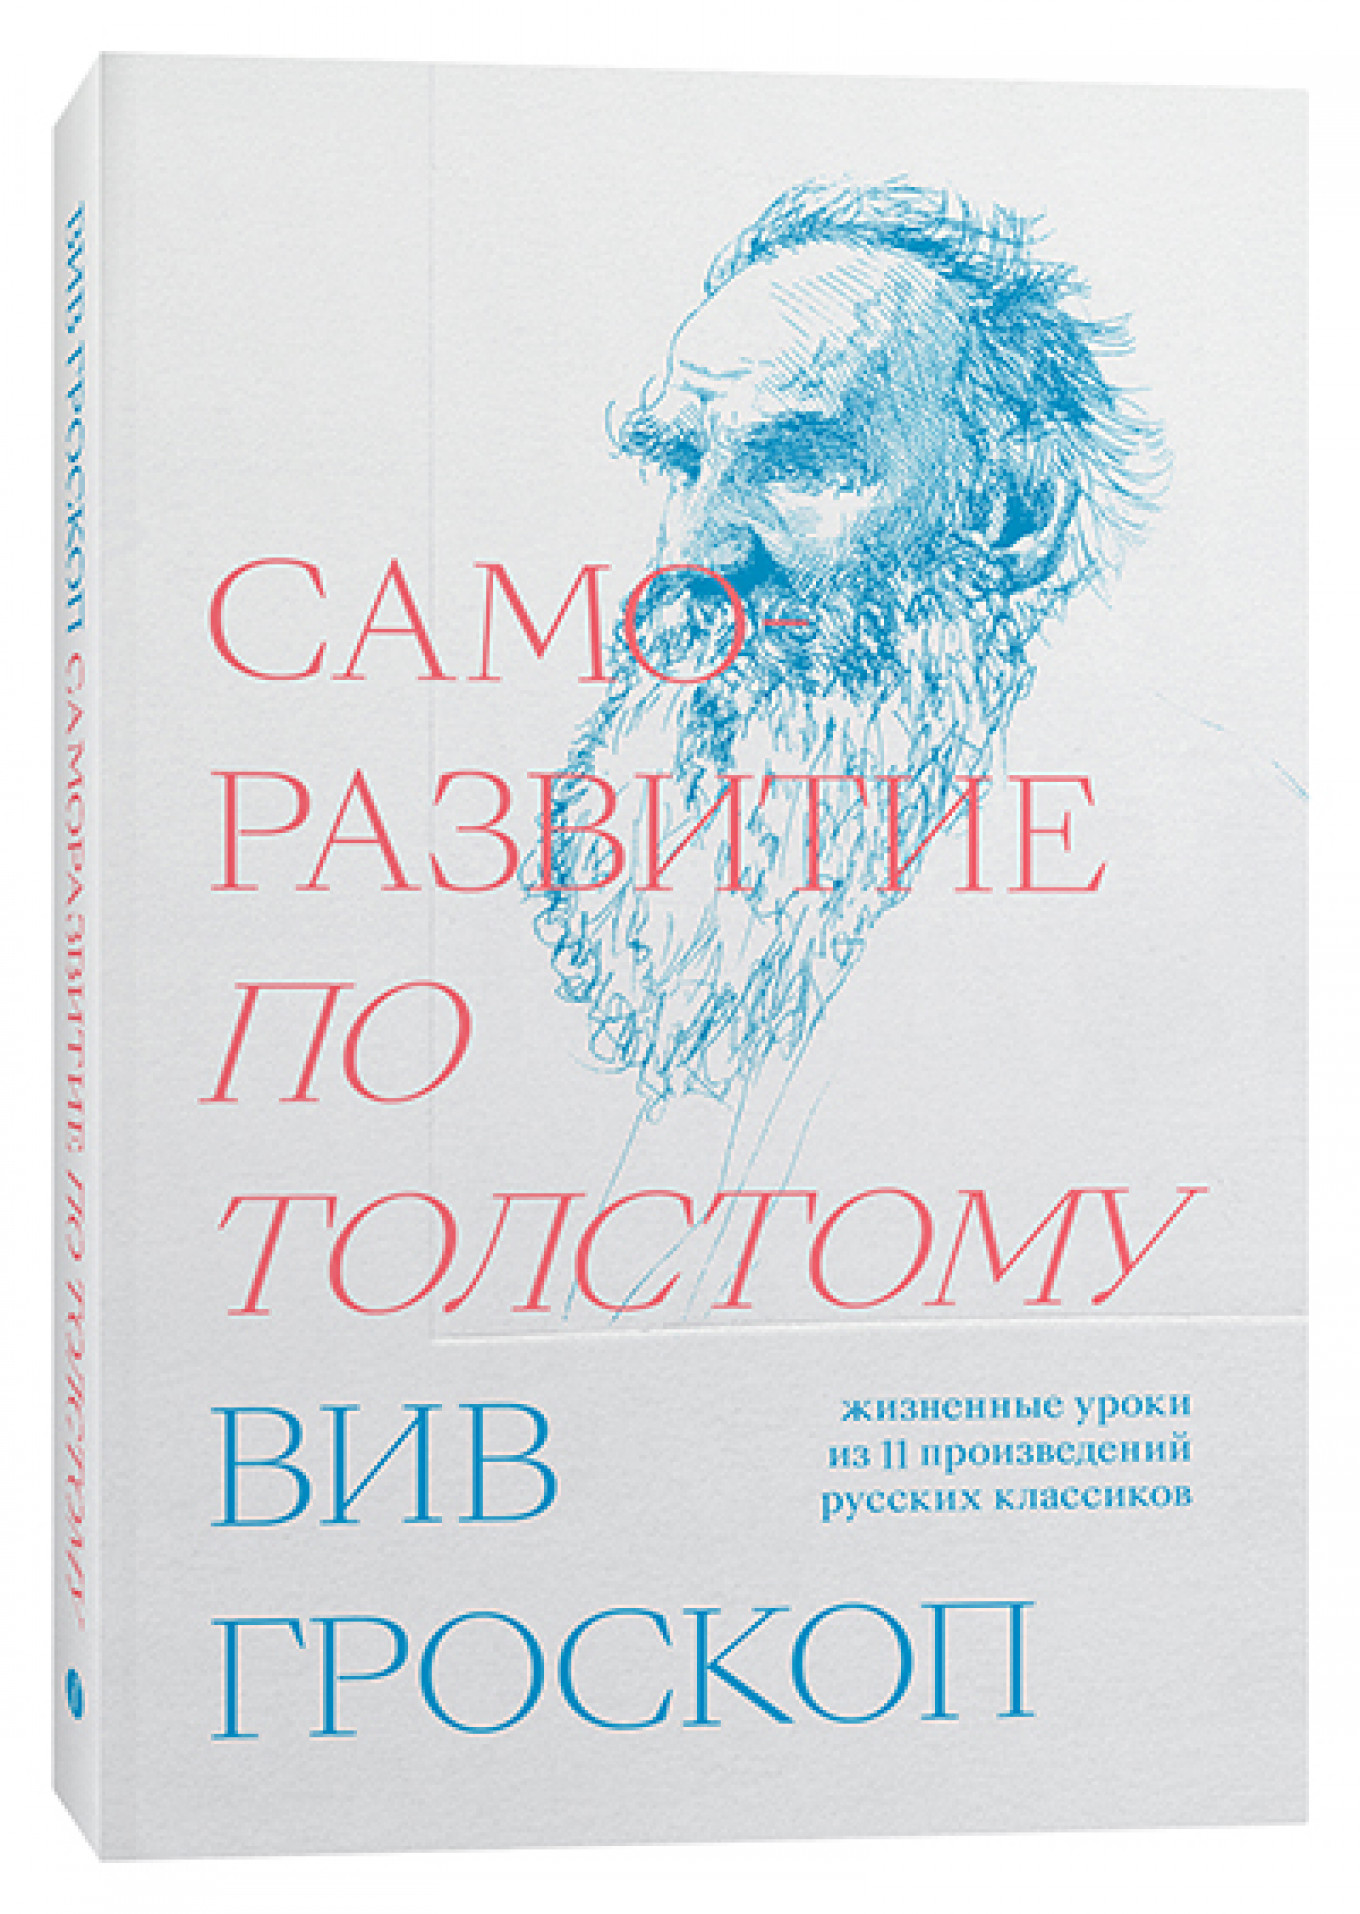 Self-Help Lessons From the Russian Classics